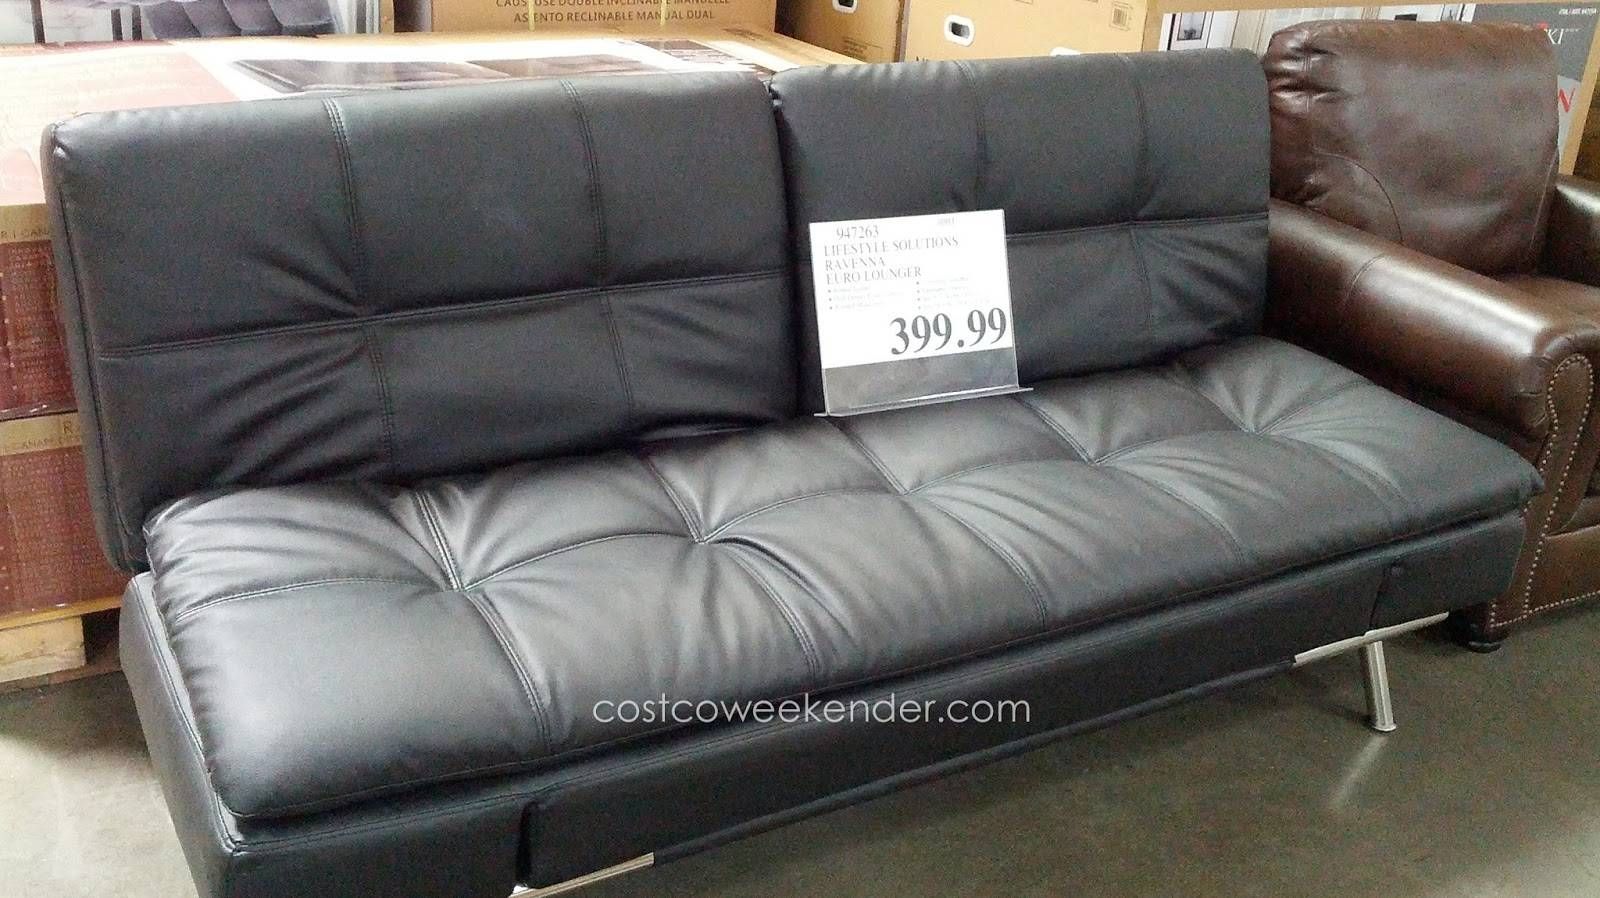 Furniture Comfy Costco Couch For Mesmerizing Living Room Throughout Euro Lounger Sofa Beds 